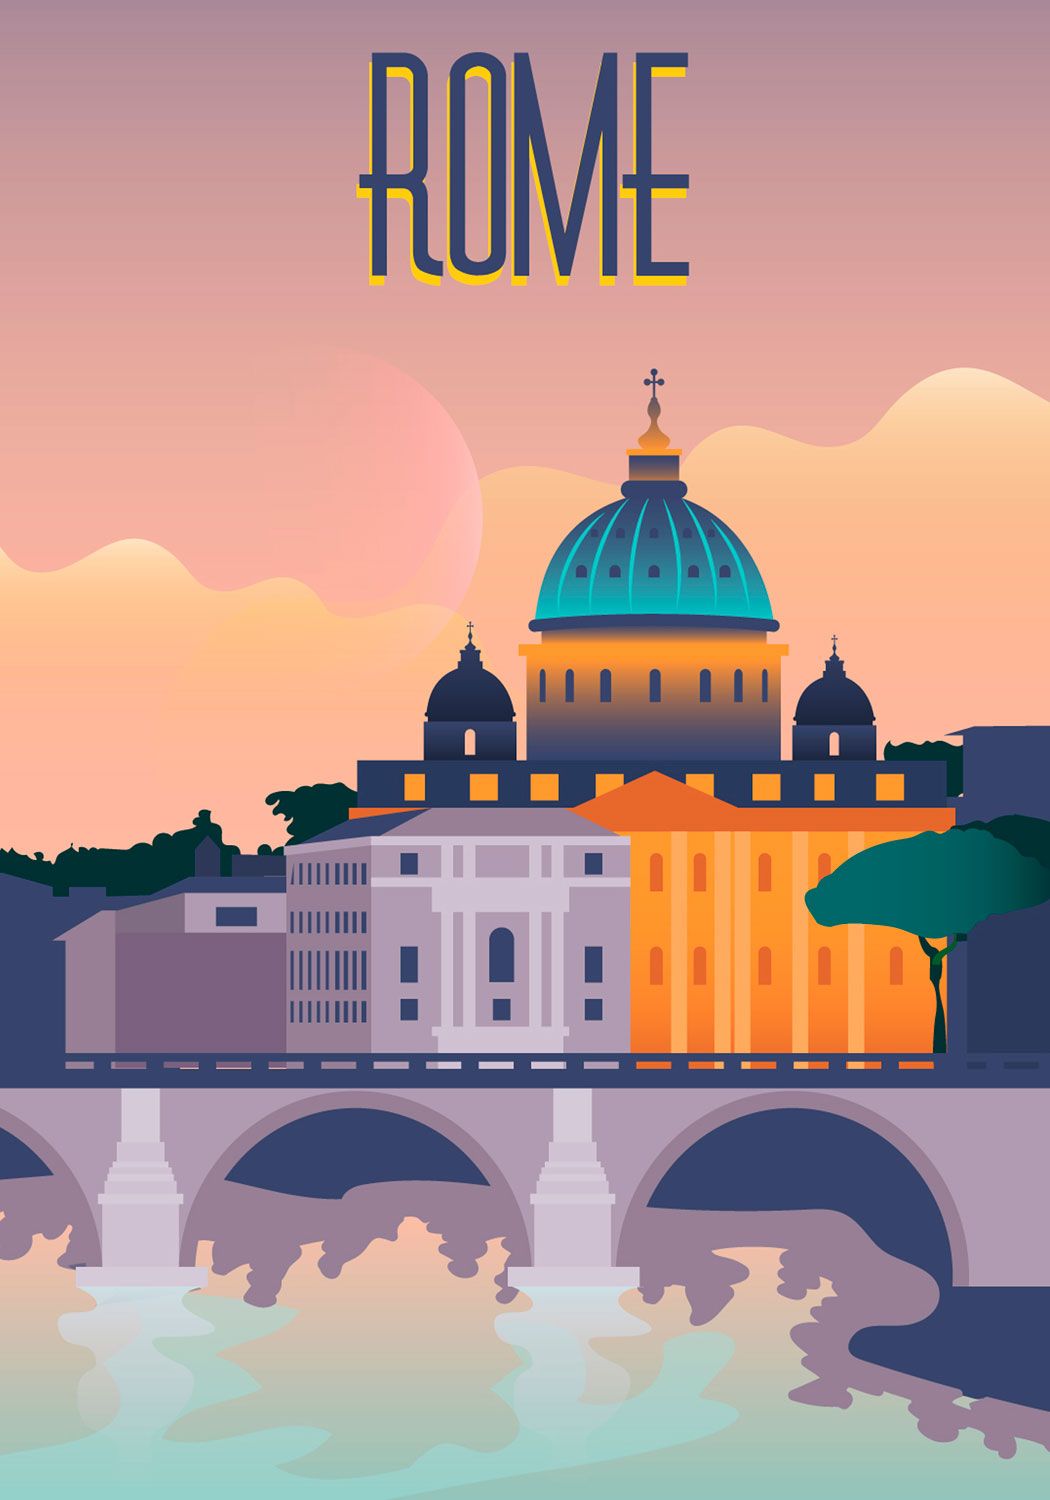 Rome Travel Poster. Free UK Delivery